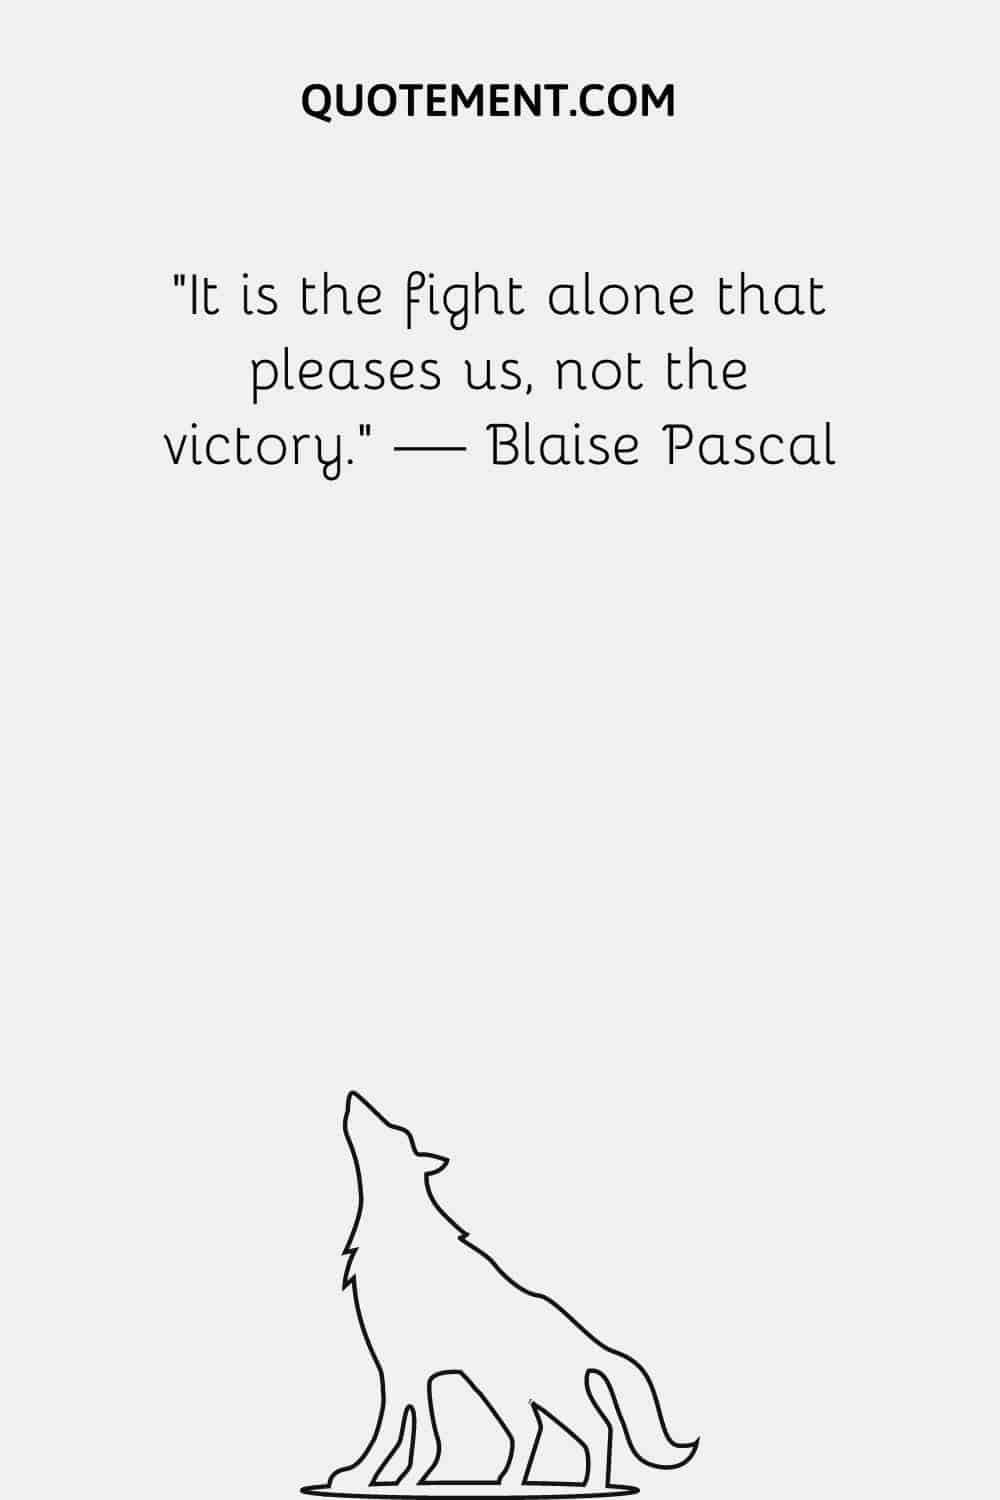 It is the fight alone that pleases us, not the victory